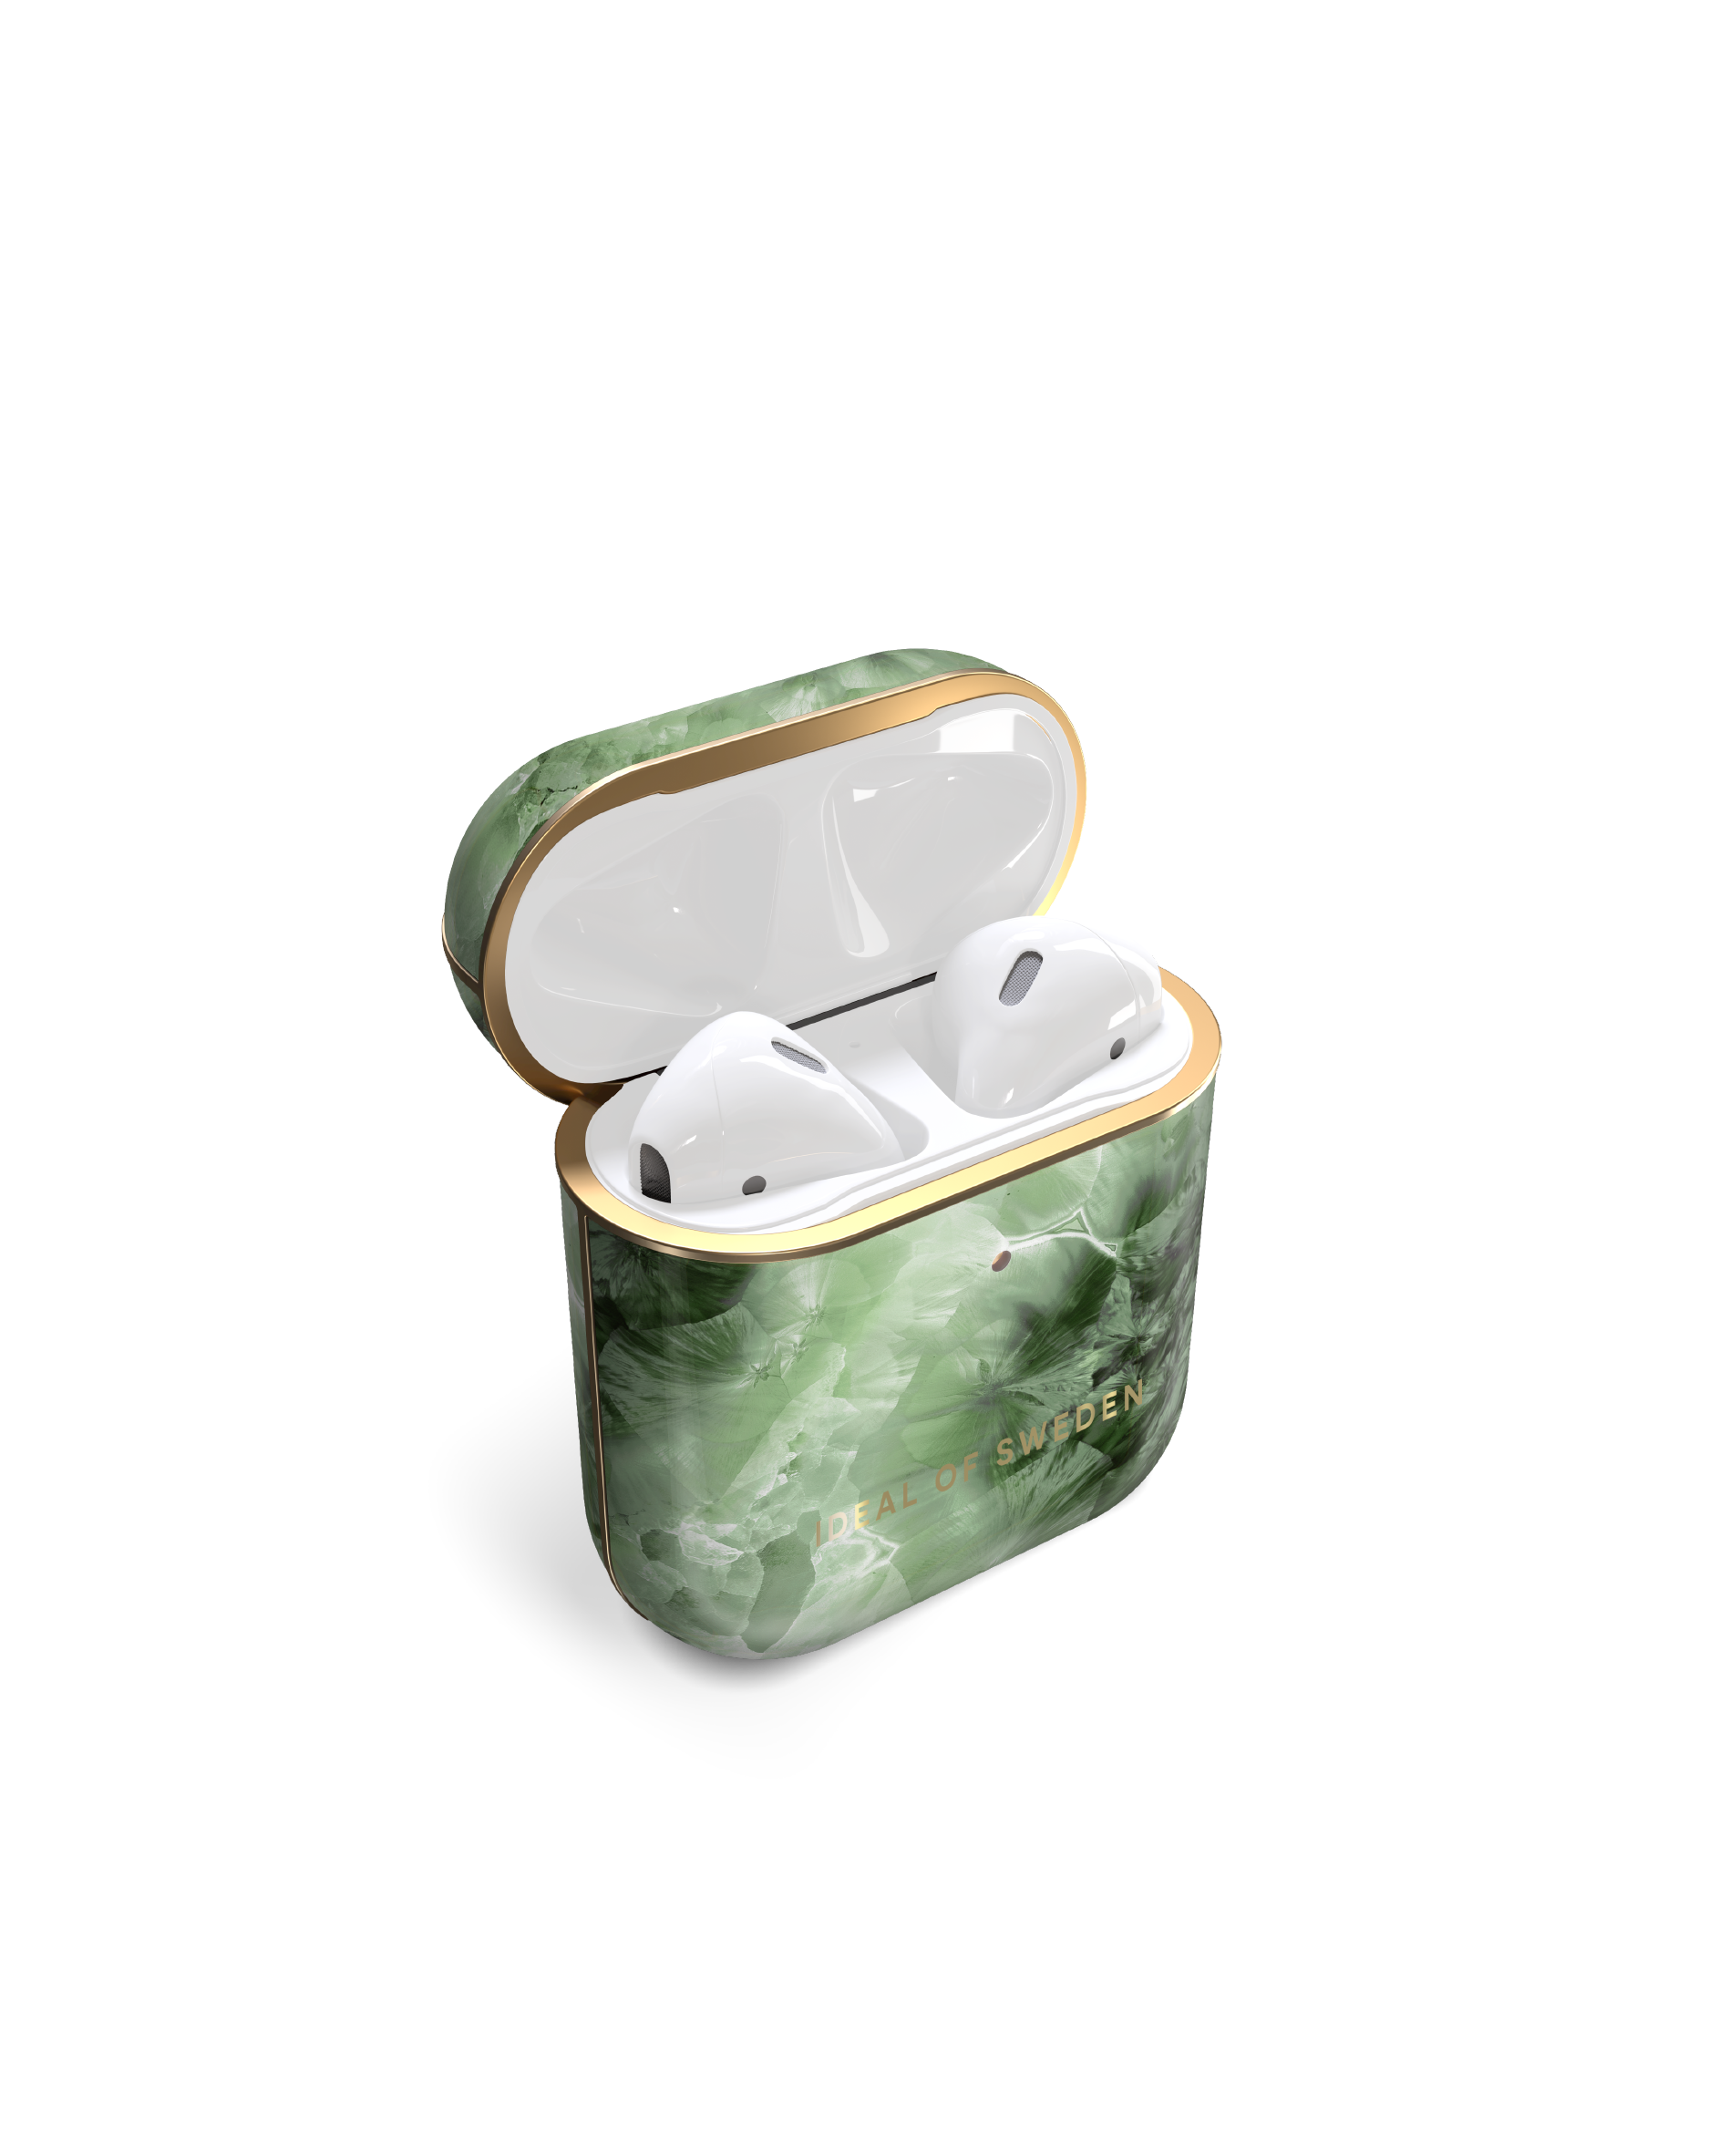 für: AirPod Full SWEDEN Green Crystal IDFAPC-230 OF Case Sky Apple IDEAL passend Cover